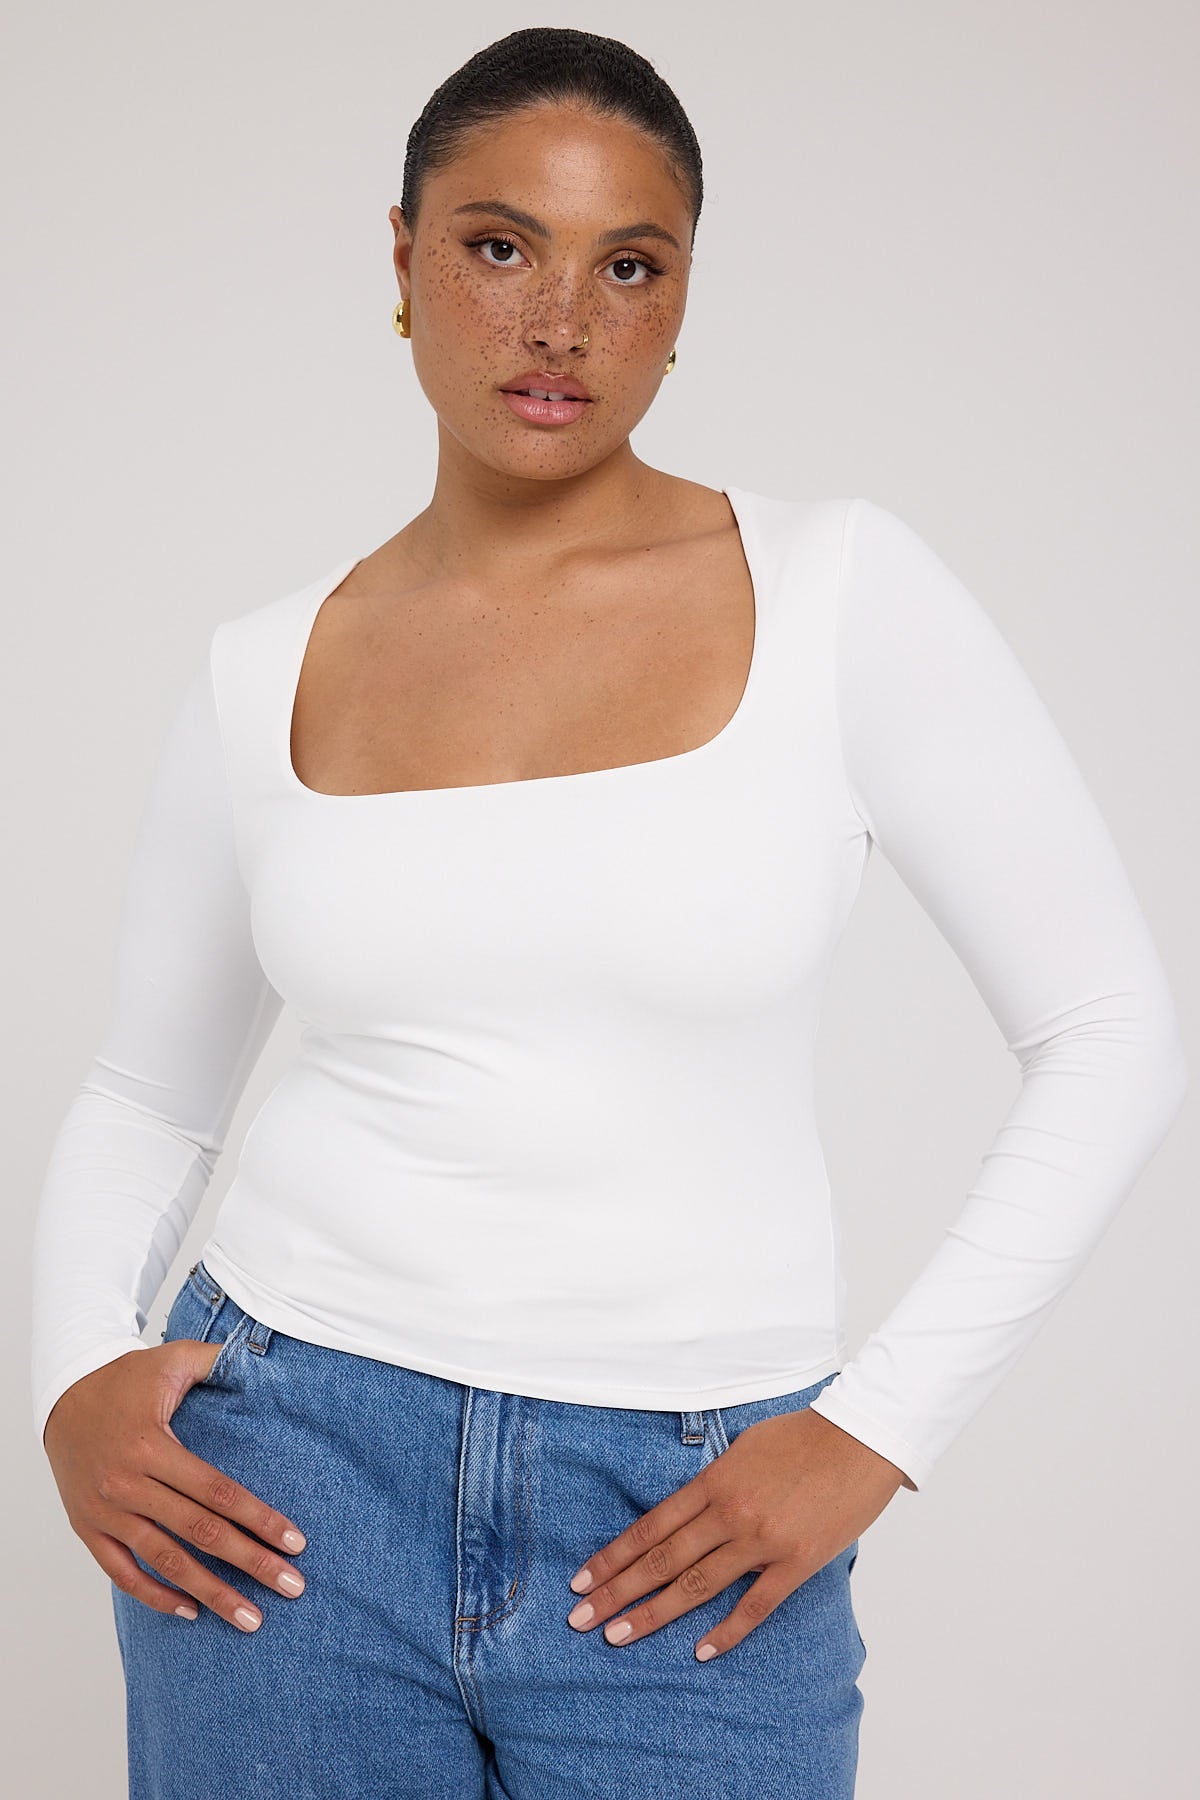 L&t Long Sleeve Scoop Neck Tee White